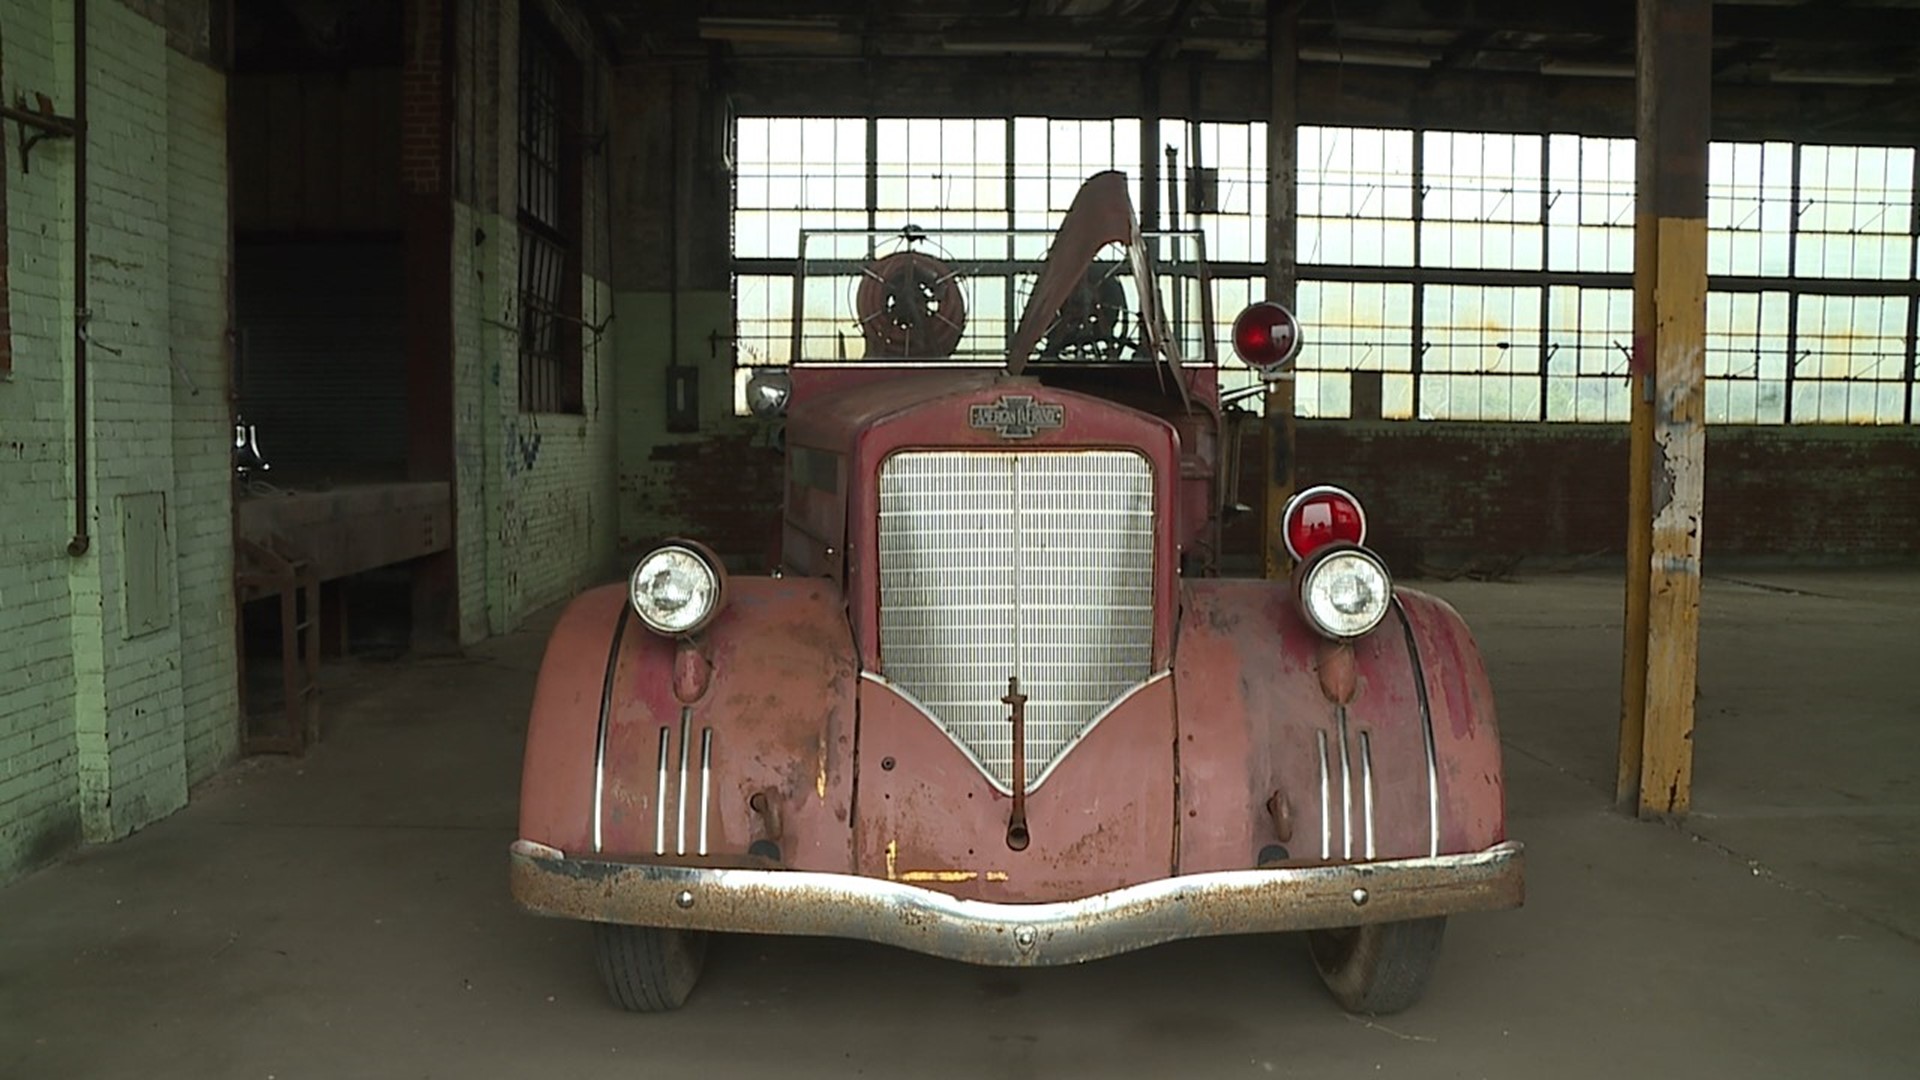 The Silvis Fire Department used the American LaFrance fire engine from 1939-1964. Now, they plan to restore it to its former glory.